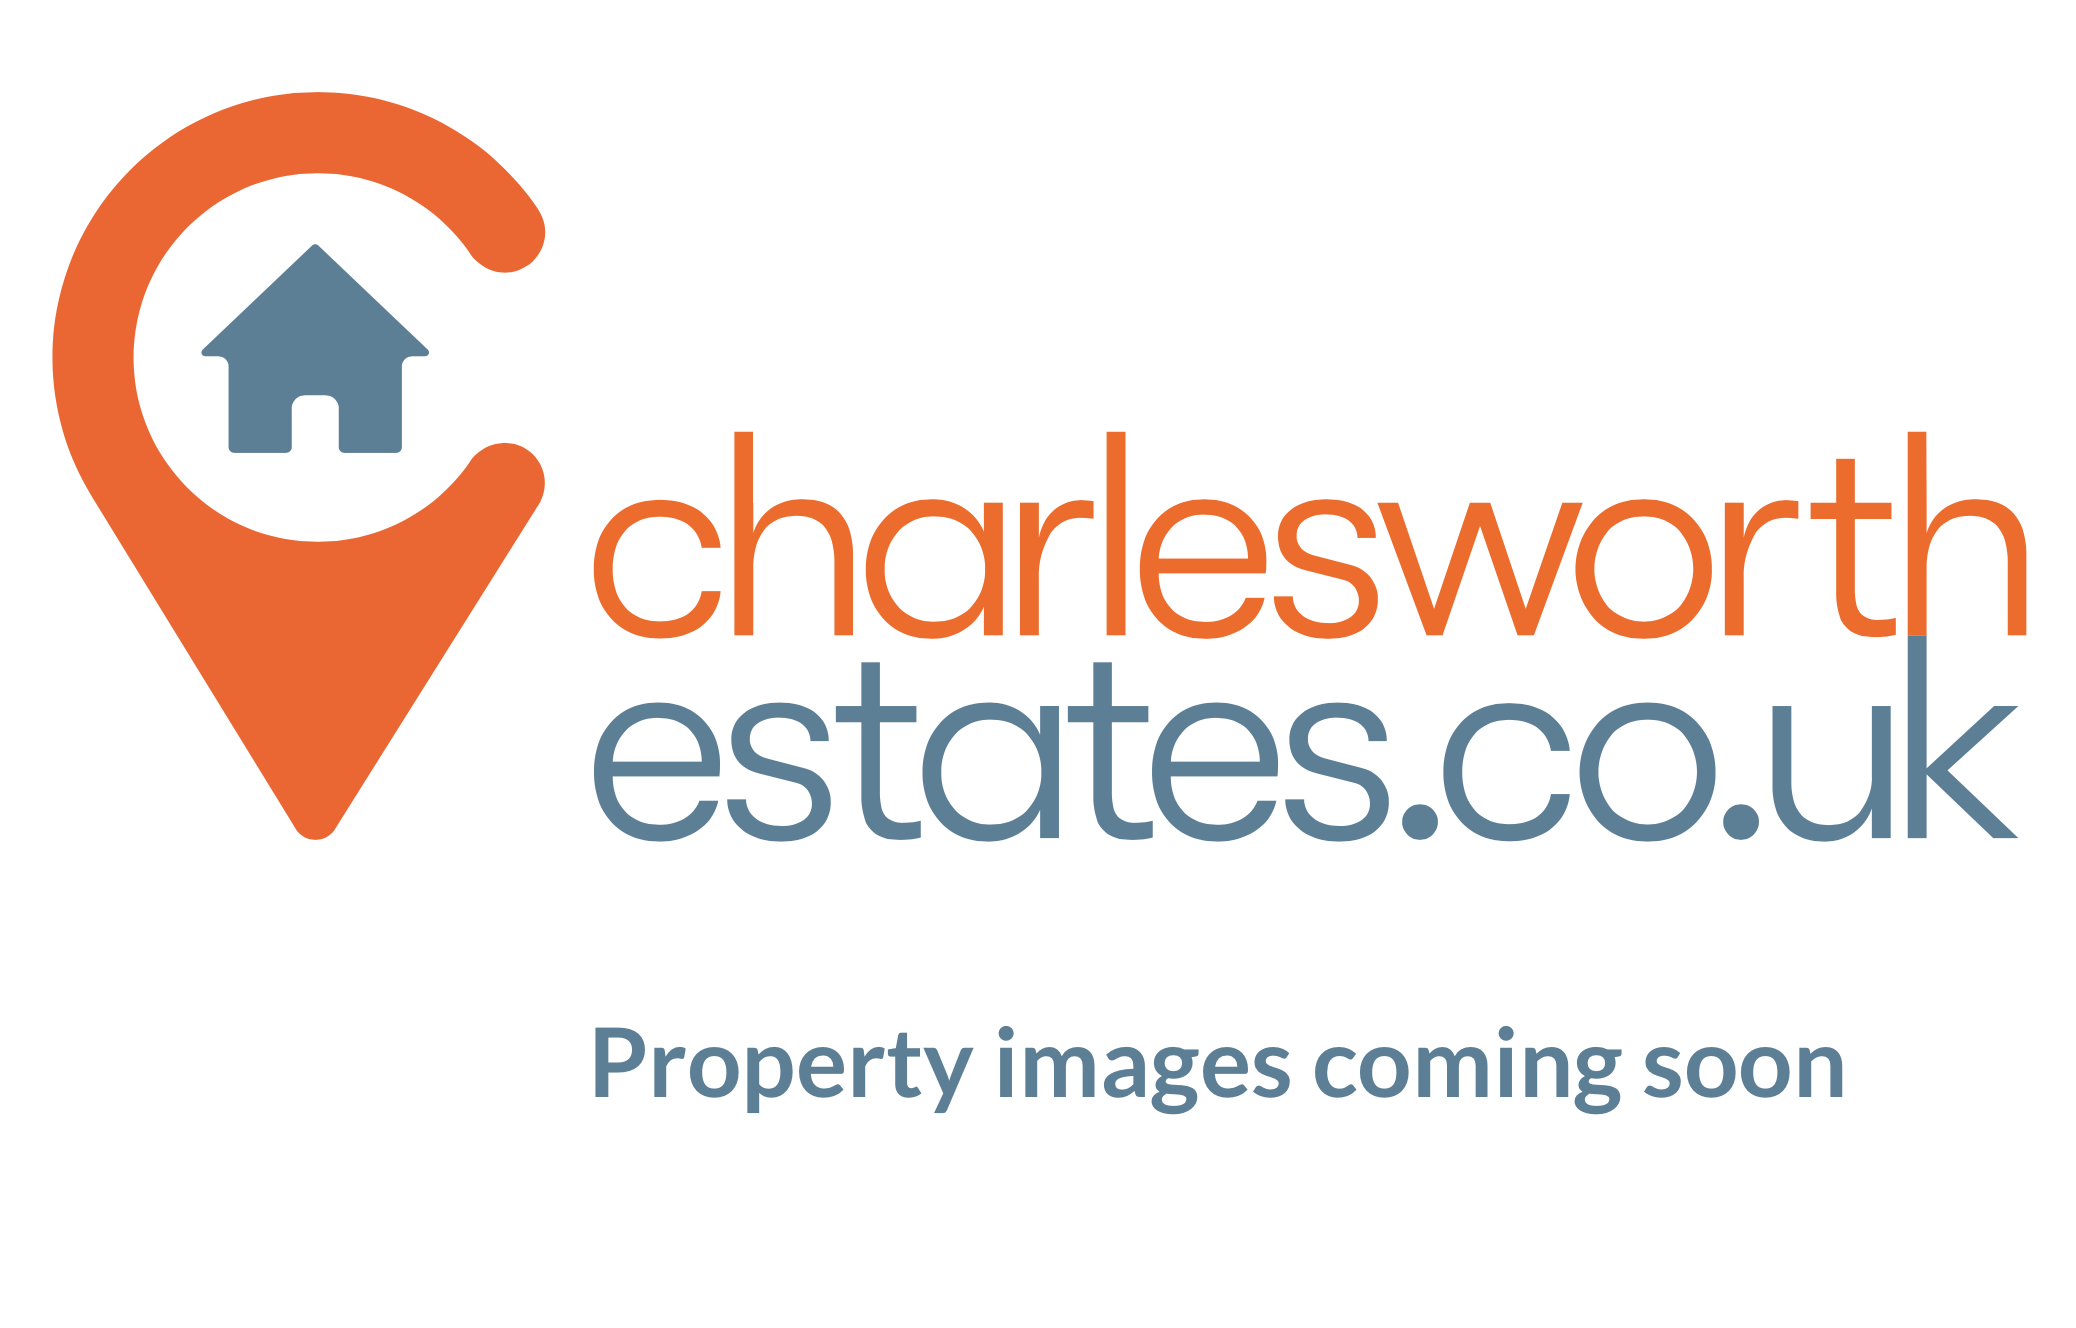 Property images coming soon